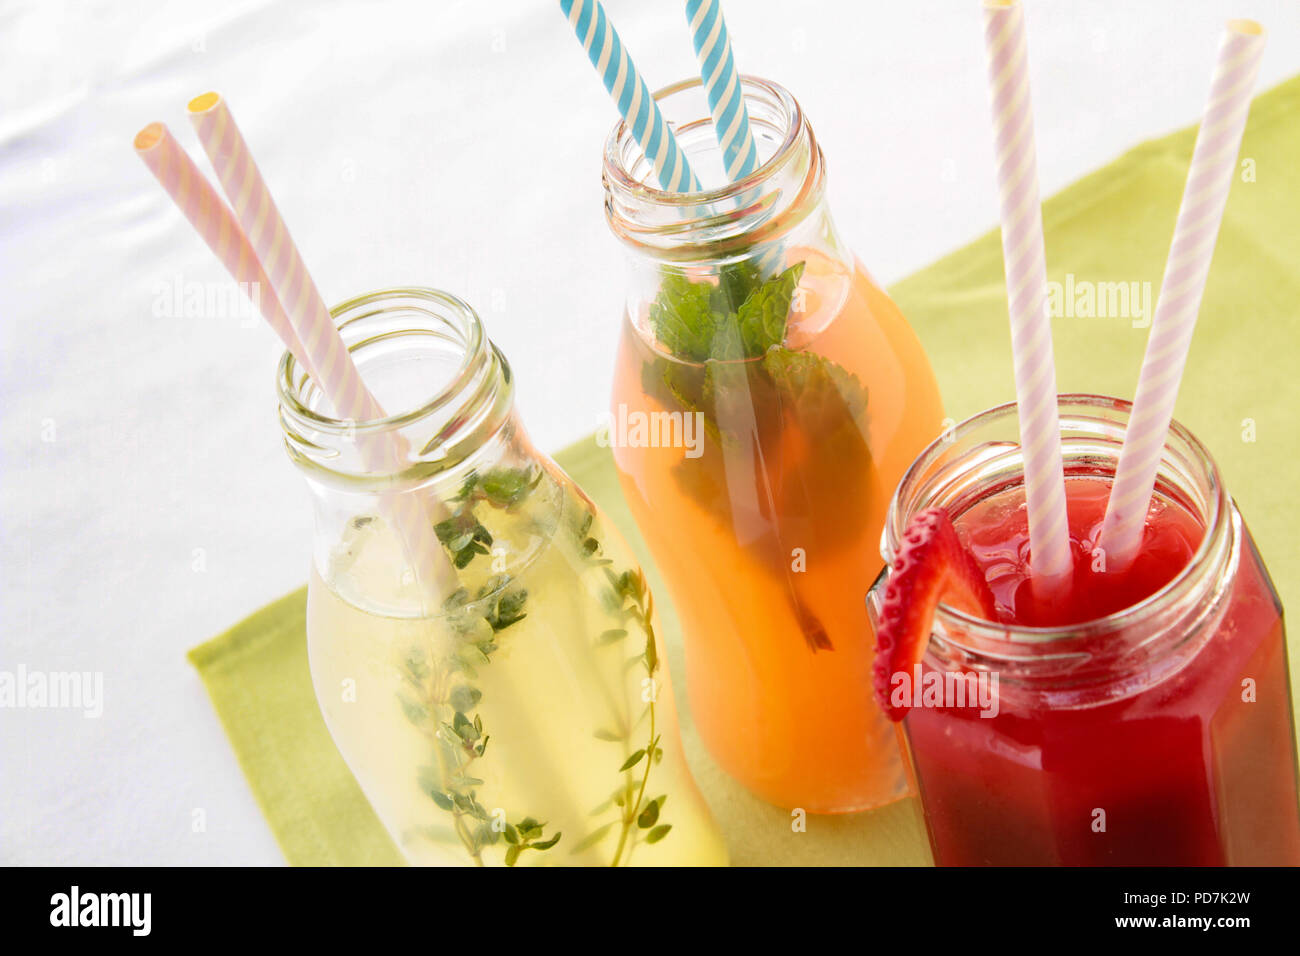 Novelty soft drinks served in glass jars Stock Photo